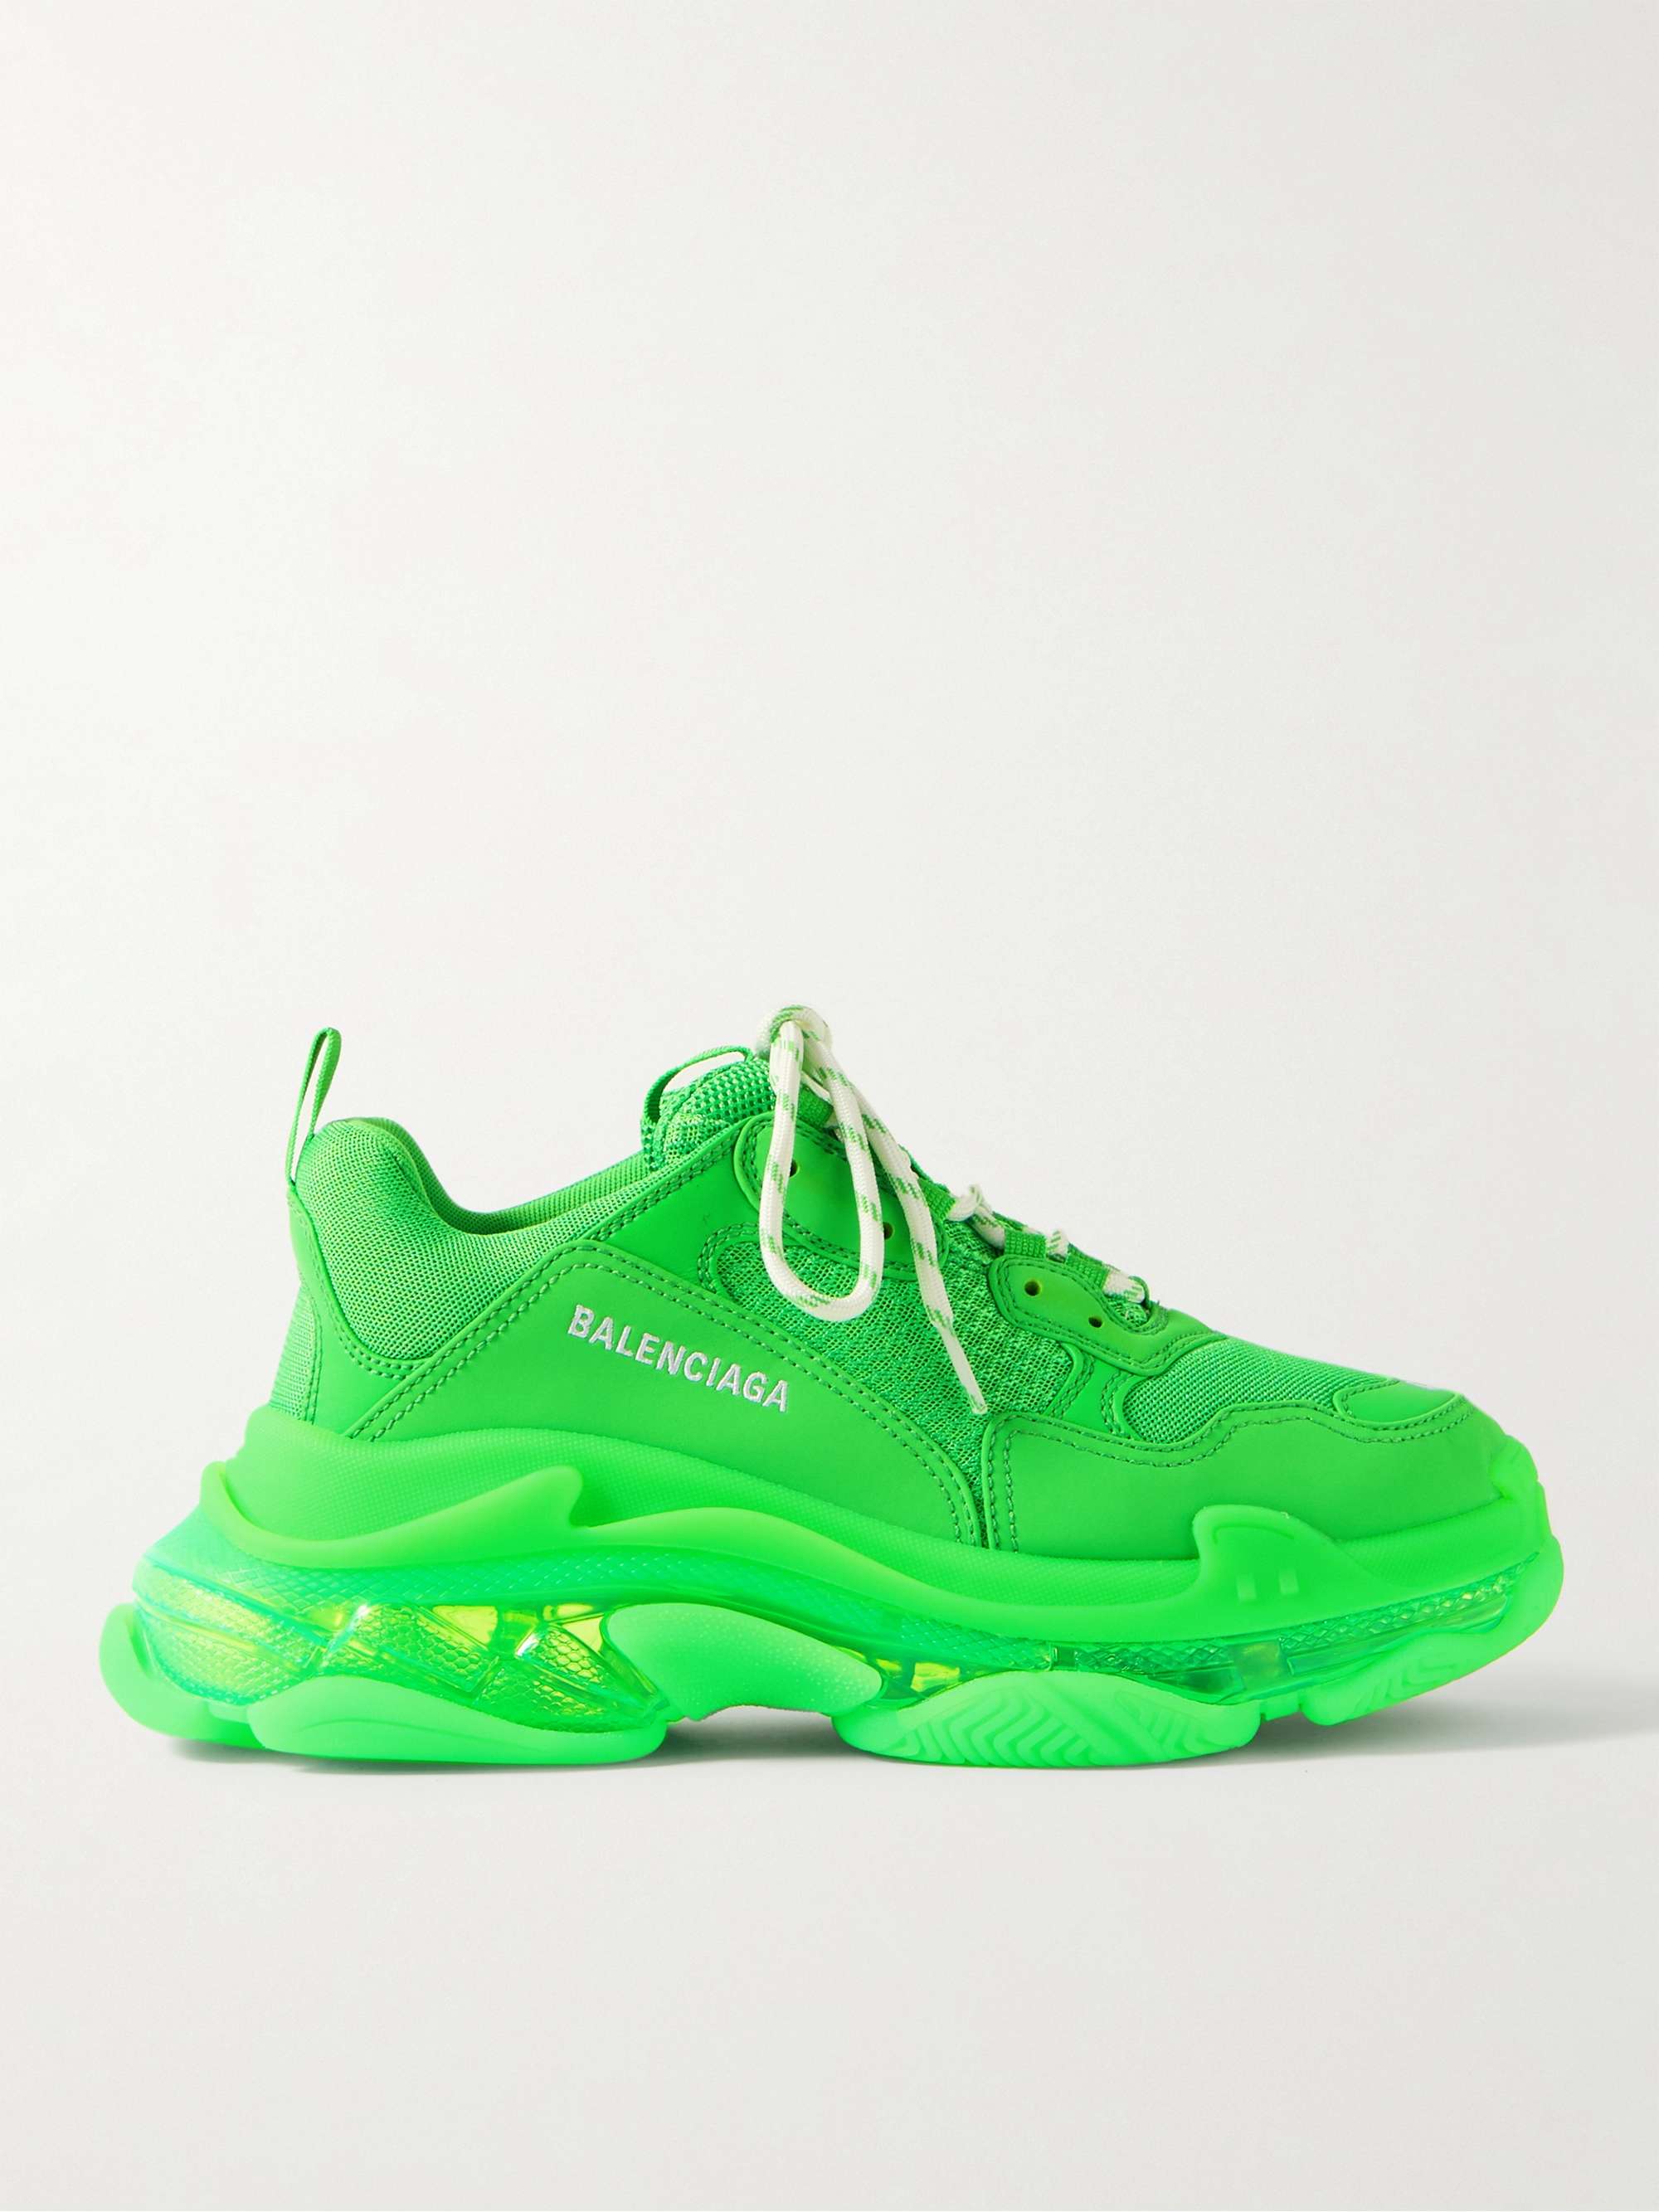 Bright green Triple S Clear Sole Mesh, Nubuck and Leather Sneakers |  BALENCIAGA | MR PORTER